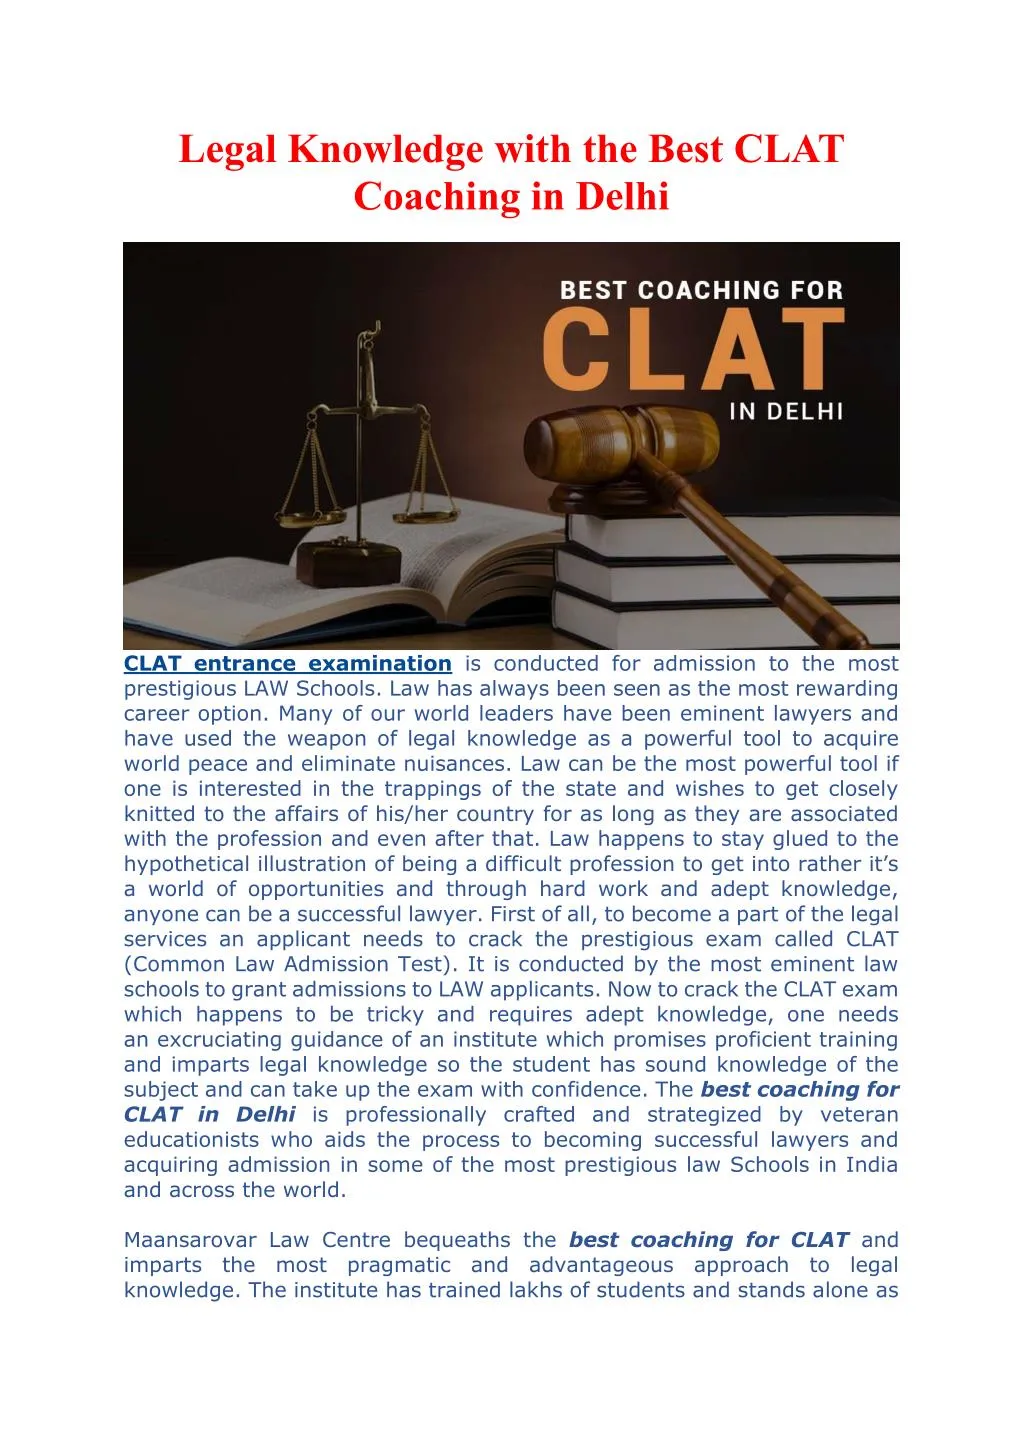 legal knowledge with the best clat coaching